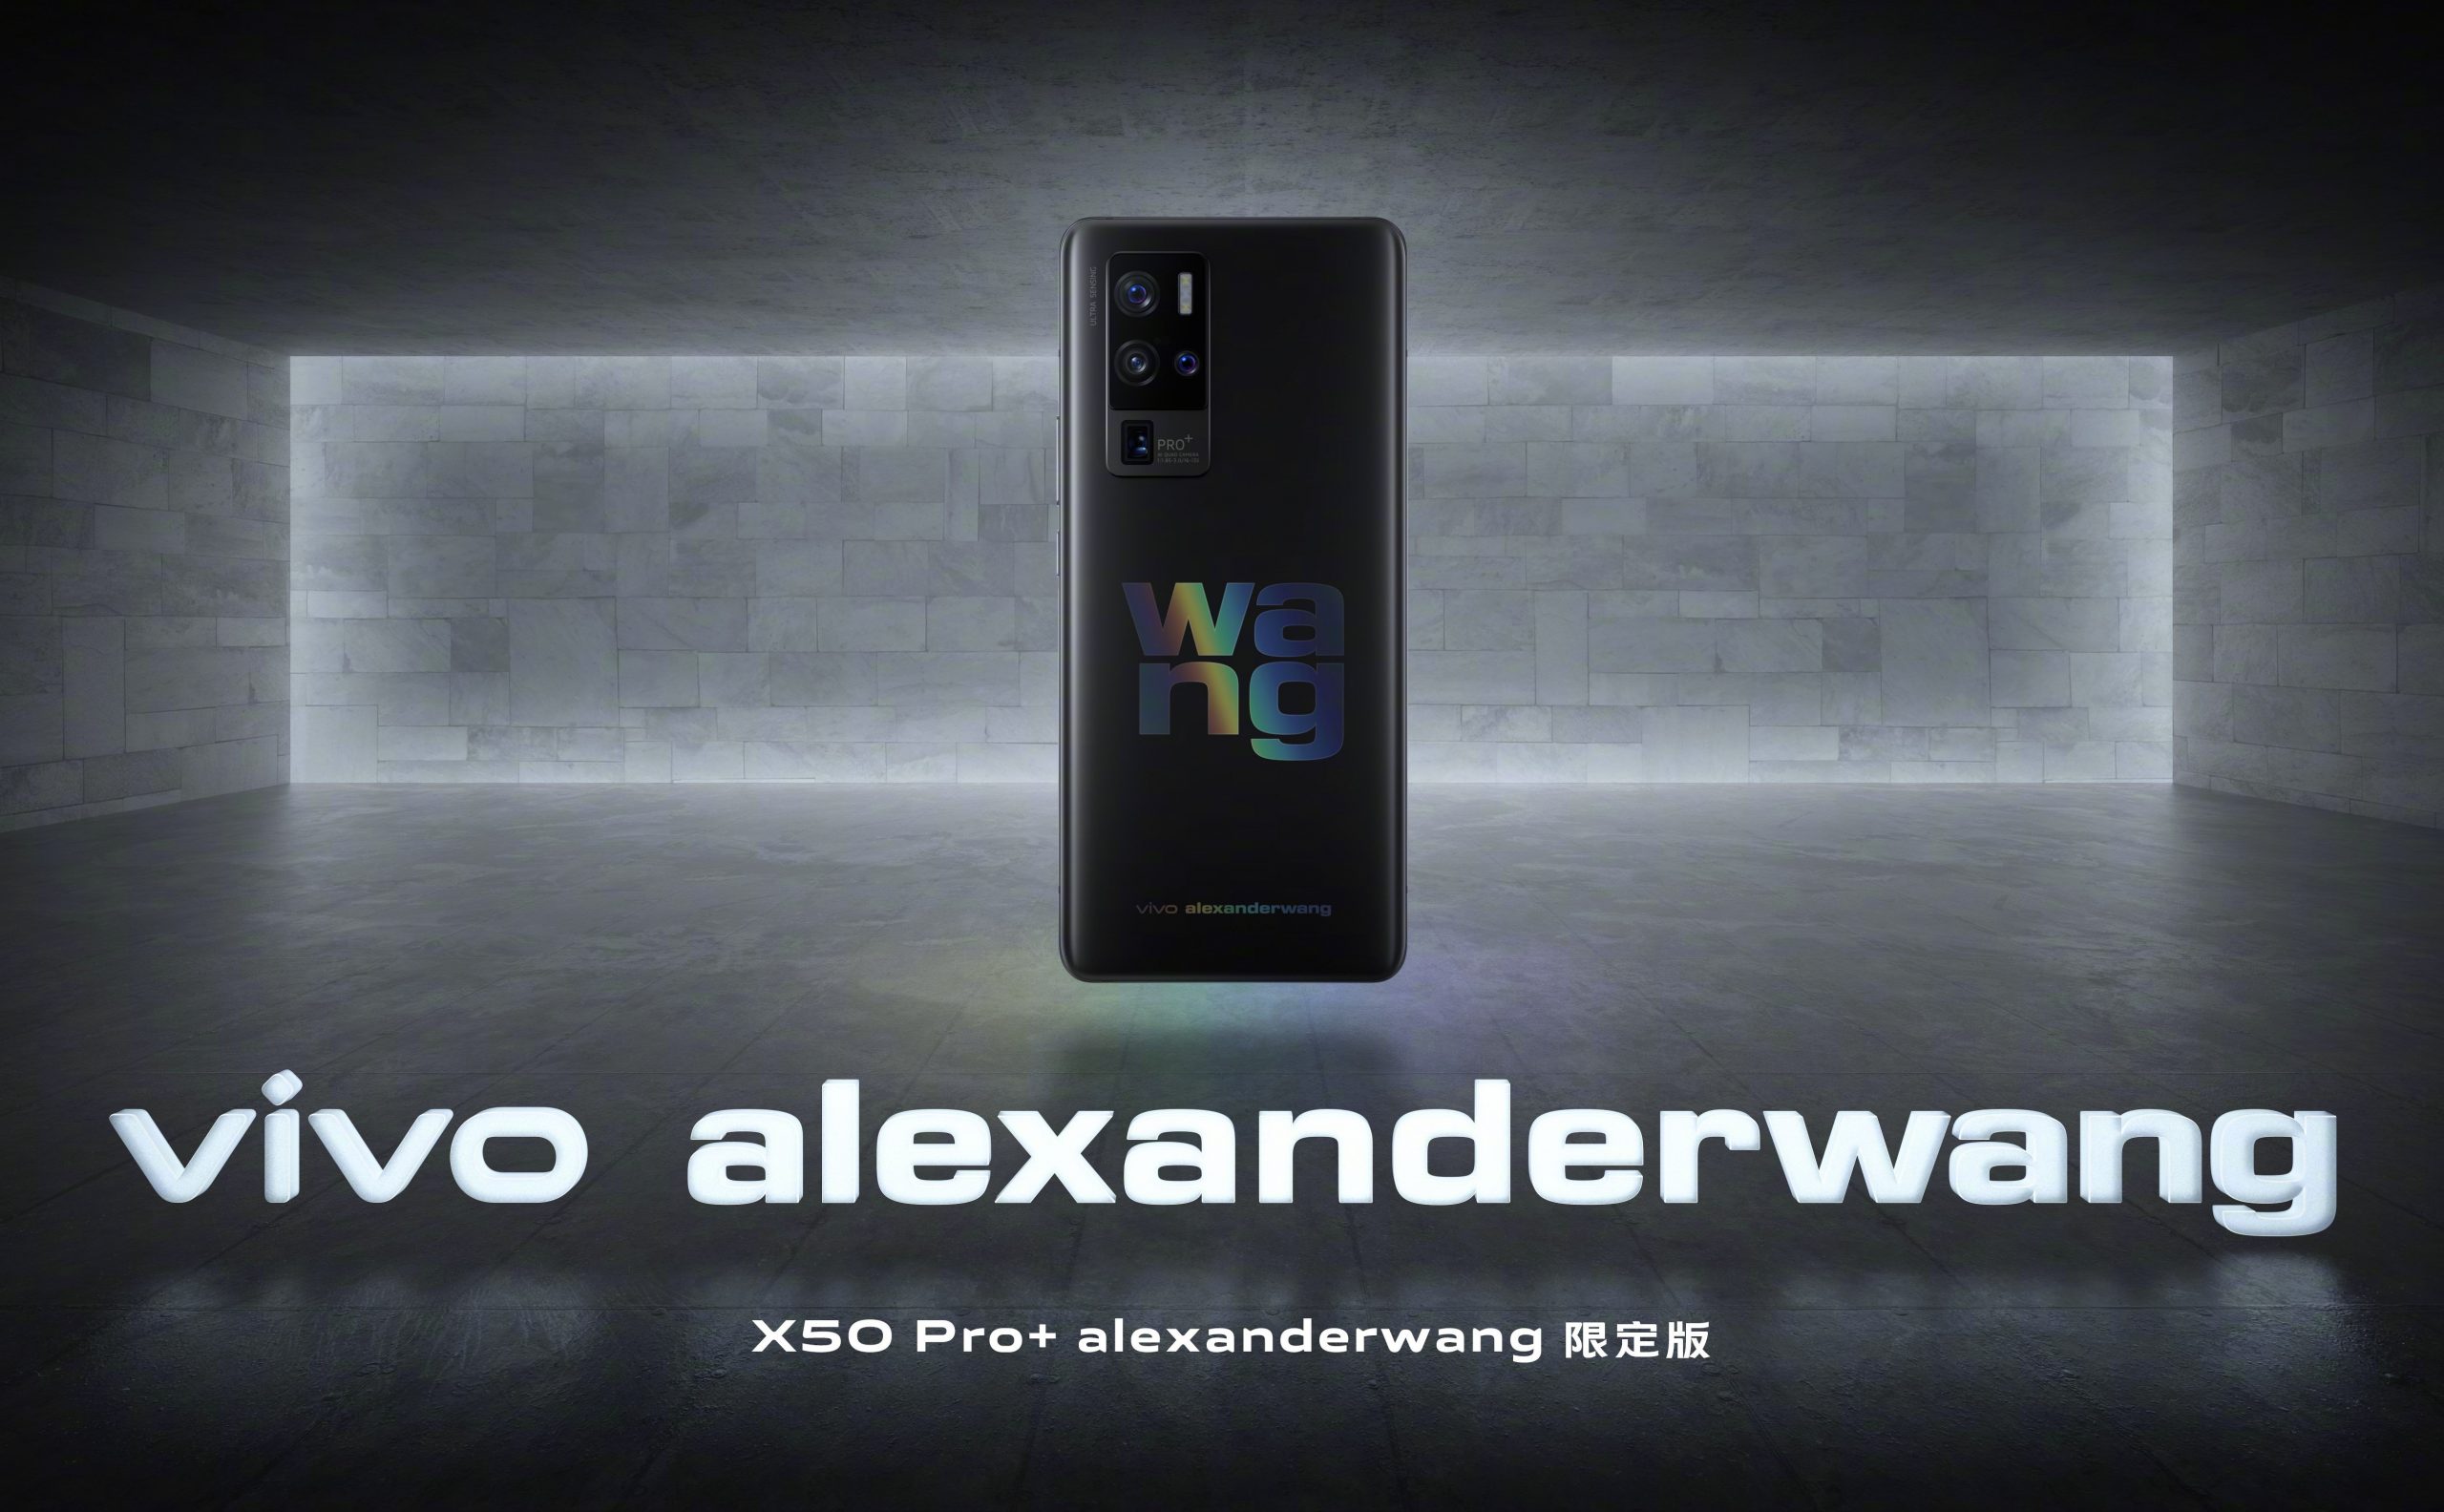 vivo X50 Pro+ alexanderwang Limited Edition launches in China; only 1,000 units up for grabs